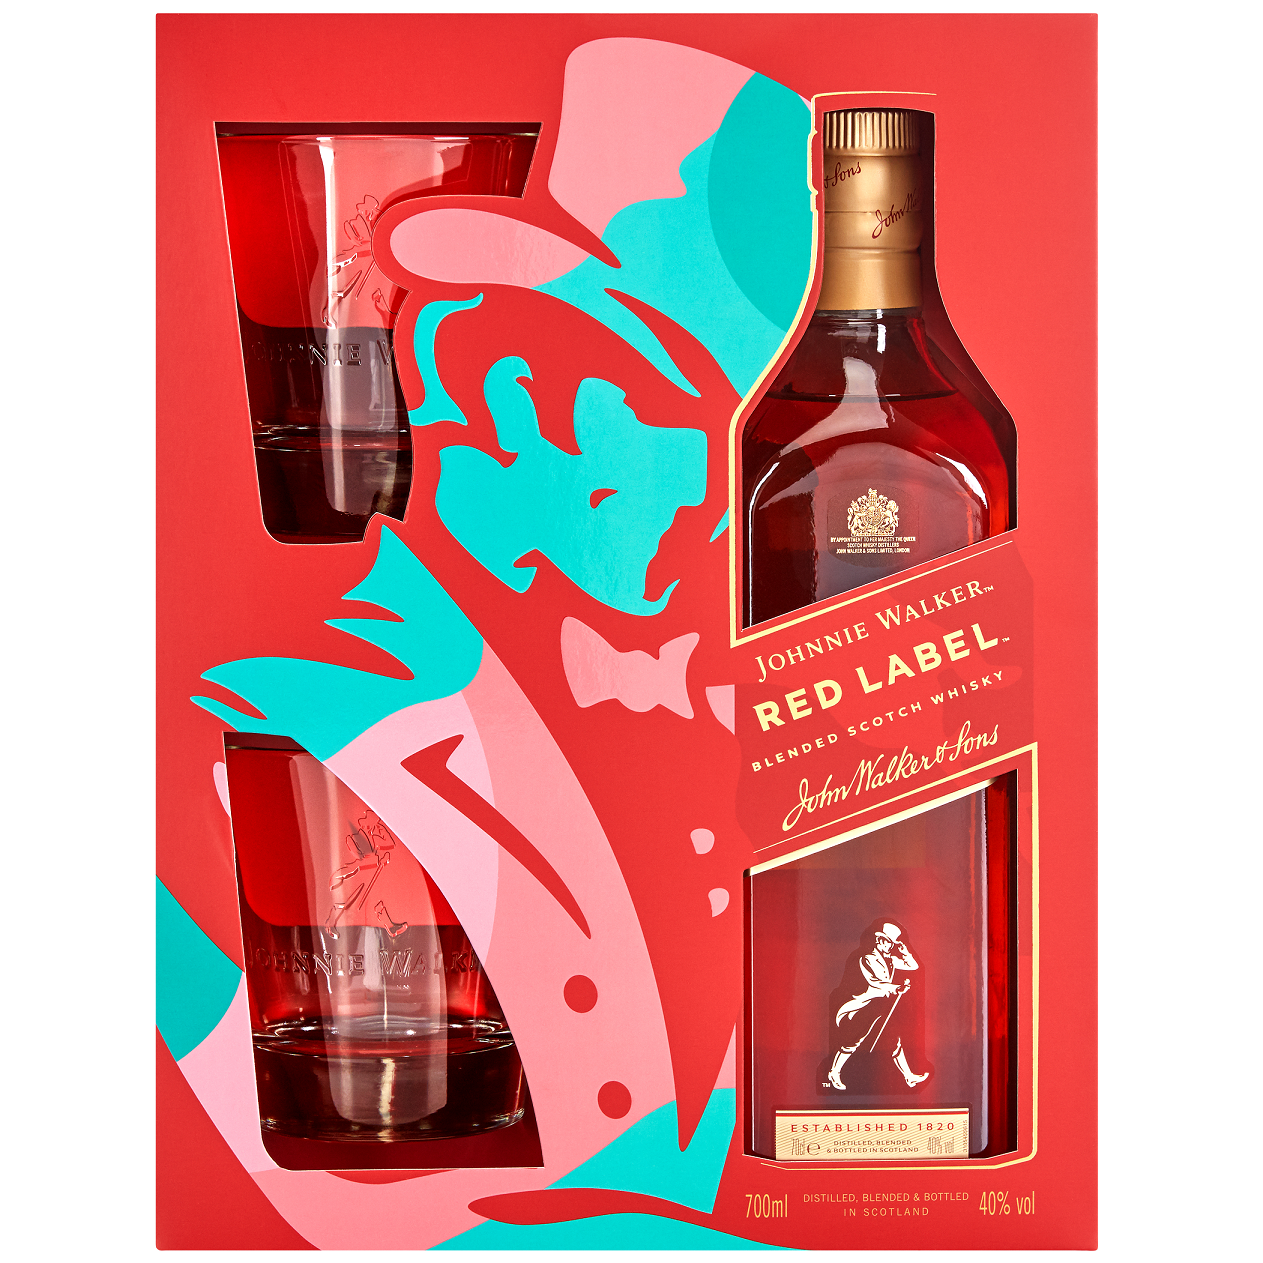 Виски Johnnie Walker Red label Blended Scotch Whisky, 40%, 0,7 л + 2 бокала - фото 1